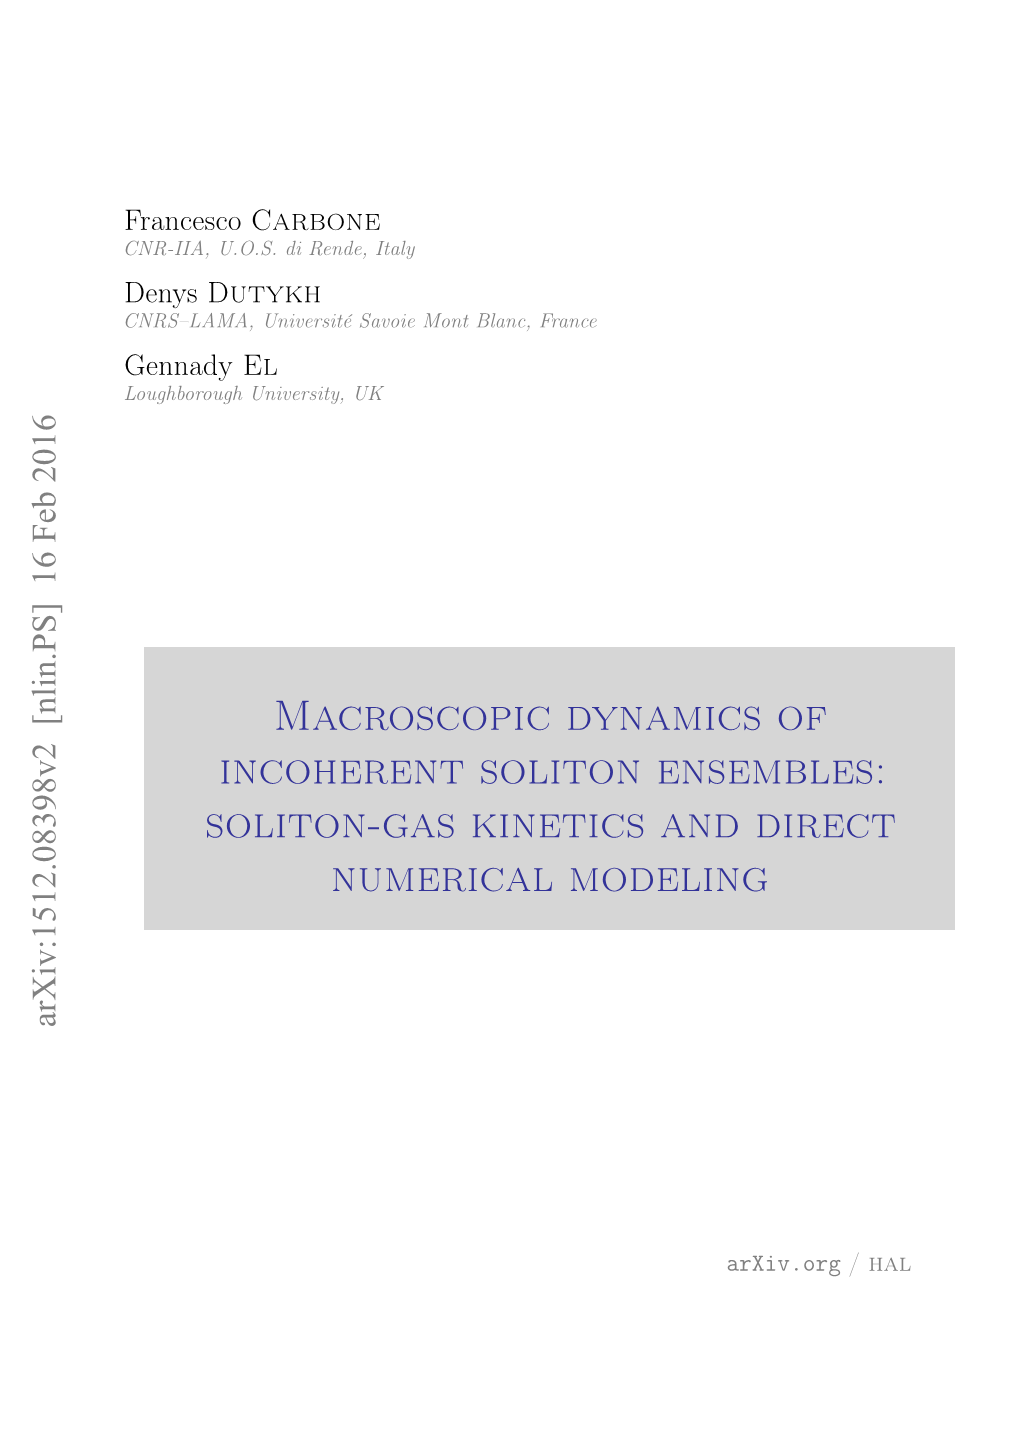 Soliton-Gas Kinetics and Direct Numerical Modeling